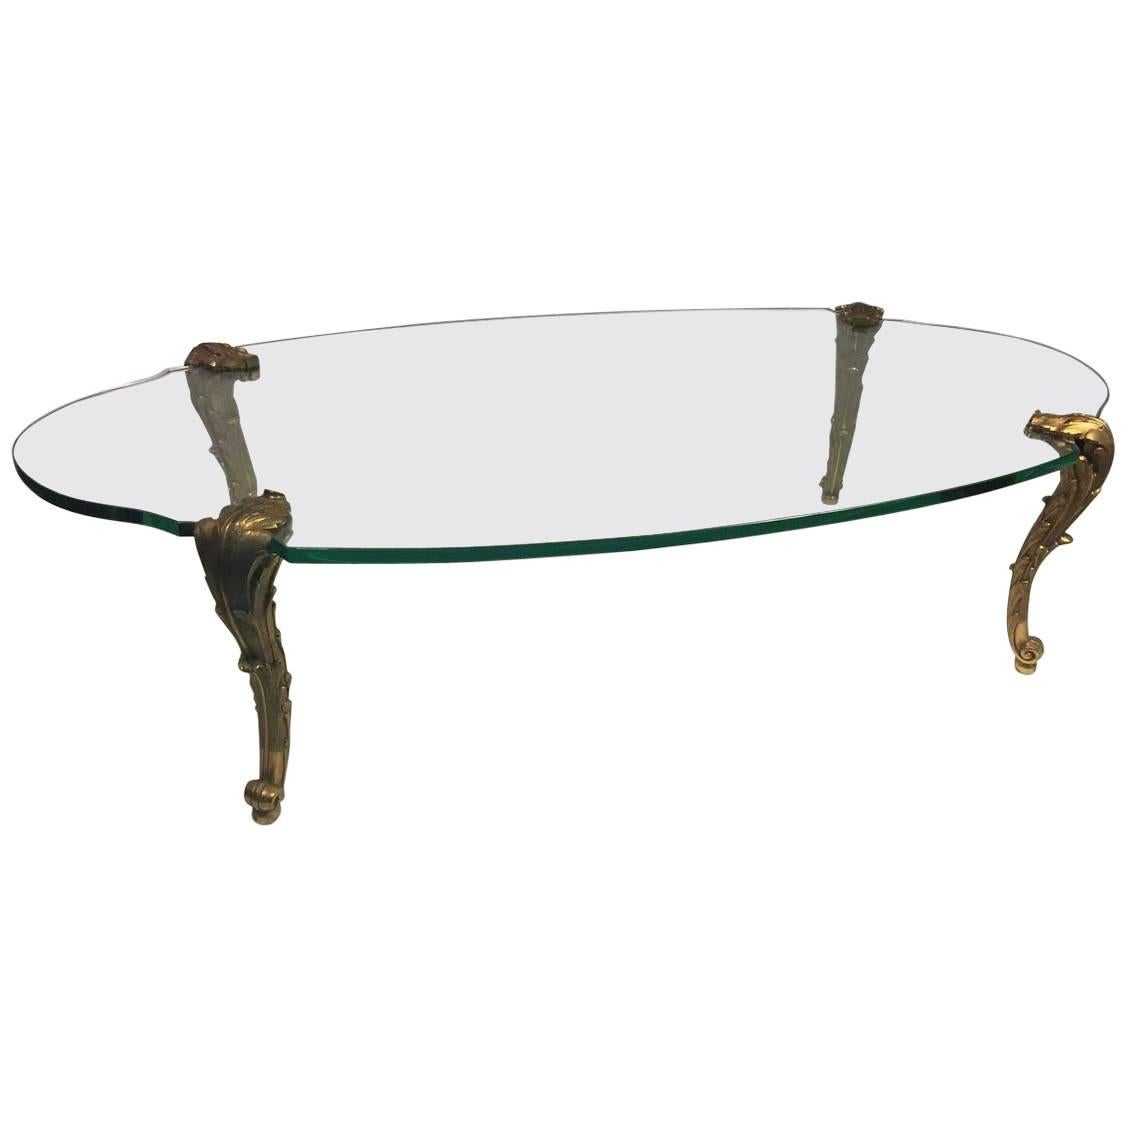 Maison Jansen Cabriole Leg Bronze and Glass Coffee Table For Sale